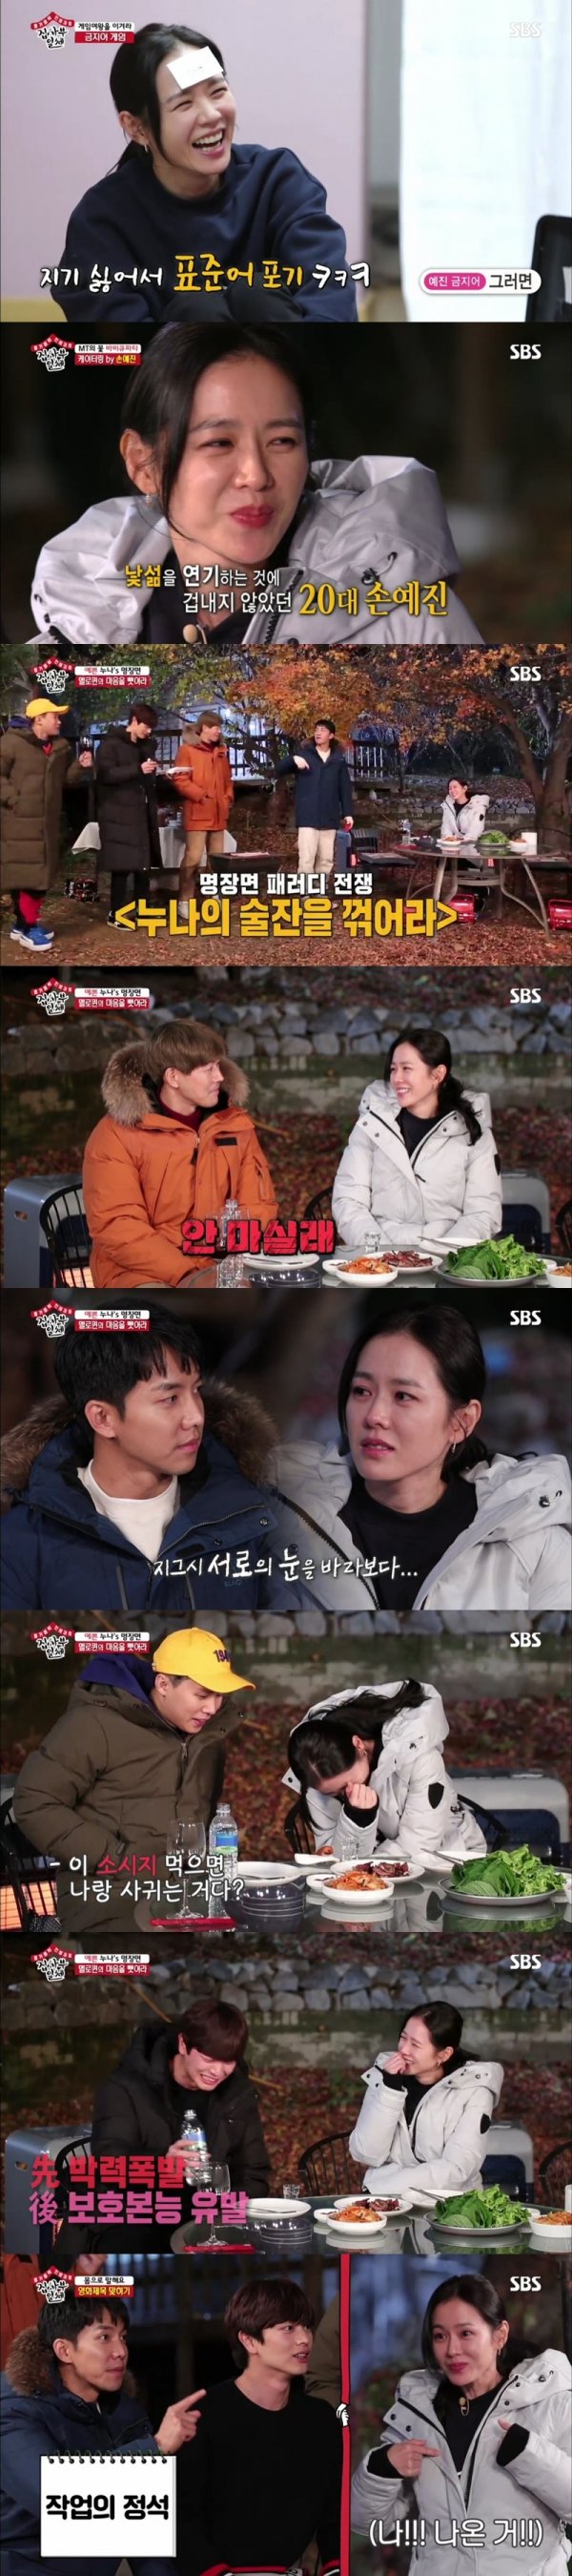 <p>Actress Son Ye-jin this ‘deacons be full’ members, with the 2019 reunion promised.</p><p>What, according to the 9th(Sunday) will be broadcast SBS ‘The Butler from itself’is a household audience 11. 1%, the Top 14. 2%(NCR, Part 2)to this day viewership high-run record this. This day ‘the Butler from itself’is 20 years old to 49 years young viewers target the 2049 target audience 5. 5%, KBS2 ‘Happy Sunday - Superman is back, 1 Night 2 days’ (4. 7%), MBC ‘Palace of the peoples husband’ (1. 4%)and the gap represents the same time zone 1 up eye-catching.</p><p>This day in the broadcast that Lee, Lee Seung-gi, Yang Se-hyeong, Yook Sungjae 1 year anniversary, the MT facilitator actor Son Ye-jin together with the special MT, enjoying the look was unveiled. Son Ye-jin is The Game this the The Game, dance the dance, perfect preparation and for reducing a reverse attraction with the members and the viewers captivated. A long time top keep the top of the actors meticulous planning and self-management, of human attraction and the ‘perfect one’may be.</p><p>First member and Son Ye-jin is a dinner you time to ‘ban The Game’the body into the pool. ‘The Game  Queen’ Son Ye-jin to break down for the members of the pincer was, but Son Ye-jin is the star of this fall-off was avoided. Eventually The Game in a losing Yook Sungjae and Lee Seung-gis dinner went. Lee Seung-gi and Yook Sungjae is Son Ye-jin this directly to the prepared ingredients into the barbecue to create and Son Ye-jin and MT is absurd. A real gift,said tingle you.</p><p>Barbecue to eat, and Lee Seung-gi who now work until 30 degree was, I heard,said the driver, release. Debut after 1 year in one, many two works by appeared for counting. Son Ye-jin this works end if it was easy to be hard scenario or seethe passion and work for the greedy.</p><p>Son Ye-jin this movie My wife got marriedBlue Dragon Film Festival Best Actress award, its a squirrel was at the time I was 27 years old. Lee Seung-gi, the 27 year old actress married her role was not easy the decision seems to have beencalled, Son Ye-jin is 24 years old in an affair with her, the 25-run divorce her I had to smoke,he said. Yook Sungjae with tremendous challenge.amazing, Son Ye-jin is now you see it a tremendous challenge to think didnt like. The stranger within a smoke about this thing how not to? Want to is fear, afraid was not the same.</p><p>This day, the members of Son Ye-jin in this film my head of the eraserthe scenes of a parody. Jung Woo sung role in this or if you drink with me back there?La asked when Son Ye-jin this drink to be successful. The first runner spiral Lee is cool this or if you drink with me back there.he said, but Son Ye-jin I dont want to,he said to laughter. Lee Seung-gi finish cool Flash failure with Yang Se-hyeong, this stepped forward.</p><p>This day in the broadcast Son Ye-jin is a member of the three do share(三人行必有我師)from three people with of them necessarily in one person is the master of that story,and 1 use some of the to be proposed. Son Ye-jins ‘love’as Lee Seung-gi, Lee, Yang Se-hyeong, Yook Sungjae is a rising type present, each one with their own theme, A 10-minute lecture period.</p><p>Lee is the argument for using the speed mental arithmetic, Yang Se-hyeong is the horse into the River, Lee Seung-gi is 25 years old by chat, Yook Sungjae is the karaoke atmosphere in the bootstrap of the river. Son Ye-jin of the exciting karaoke practice in the explosion. Hot for expensive items Bunny ears hat, Son Ye-jin is a member with them for their ‘bus in’and the gorgeous stage. The frenzy of the dance partyto your shooting. Son Ye-jin of reversal of ‘excited’members of the original excitement and playing with sister, teach drill there was no need,said Marvel.</p><p>Pack and whiter the light, finishing the day for members. The next morning, Son Ye-jin is members toast to directly and together the two walk out on her. Son Ye-jin is a member them, I promise. And, with the promise of a man and the promise of the all importanta few days promise to do one next year kept the show will be fun,he said.</p><p>Yook Sungjae solo album challenge, Lee Seung-gi is a week of desert travel, Yang Se-hyeong is the other, Lee is playing the pianogoals for next year as promised. All of me ‘and the promise of’said back finally Son Ye-jin is next year in the house from itself in themembers meet again in the promise was kept to verify that thepromise walk and 2019 material nature promised. The members all cheered for among Yook Sungjae 1 year why go on looks,revealed that Son Ye-jin on the bread I am.</p><p>Especially this day, Son Ye-jin the members and of the conditions, the scene, per minute viewership of 14. 2% ‘best 1 minute’.</p><p>Photo by SBS ‘The Butler from itself’</p>